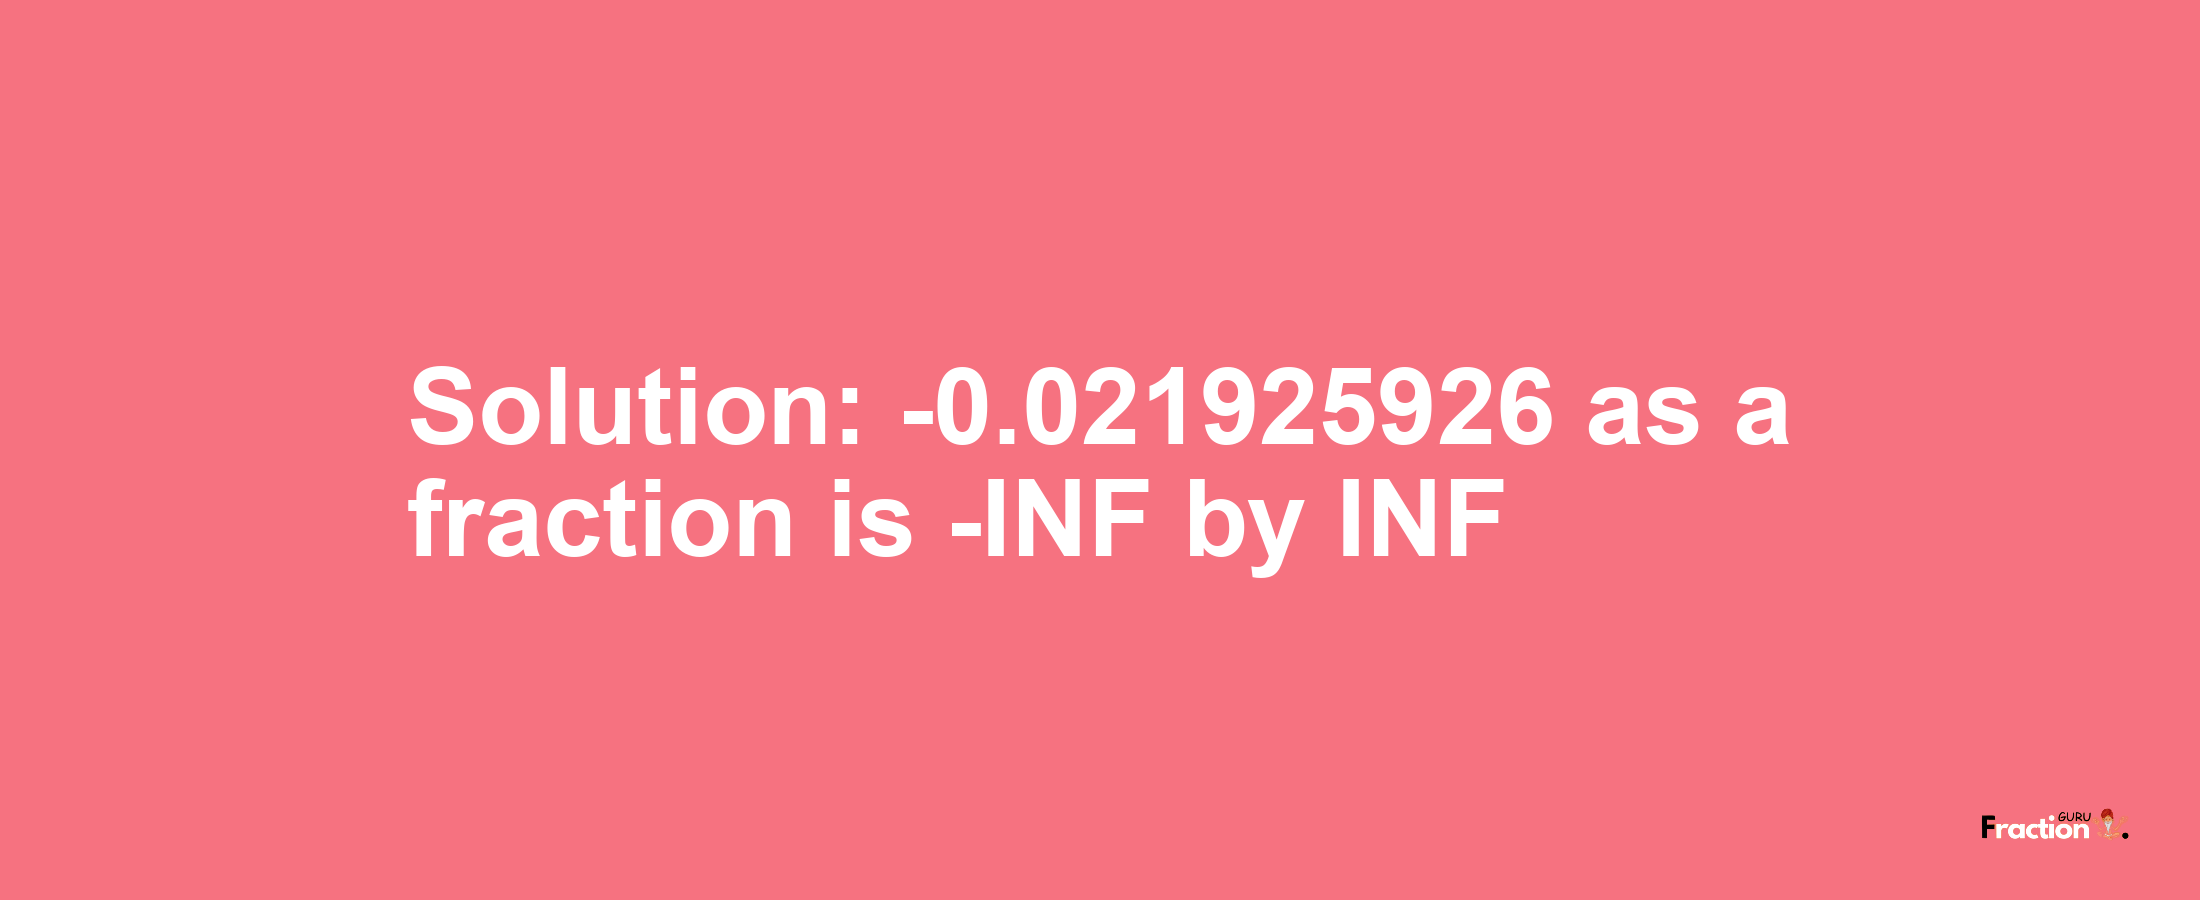 Solution:-0.021925926 as a fraction is -INF/INF